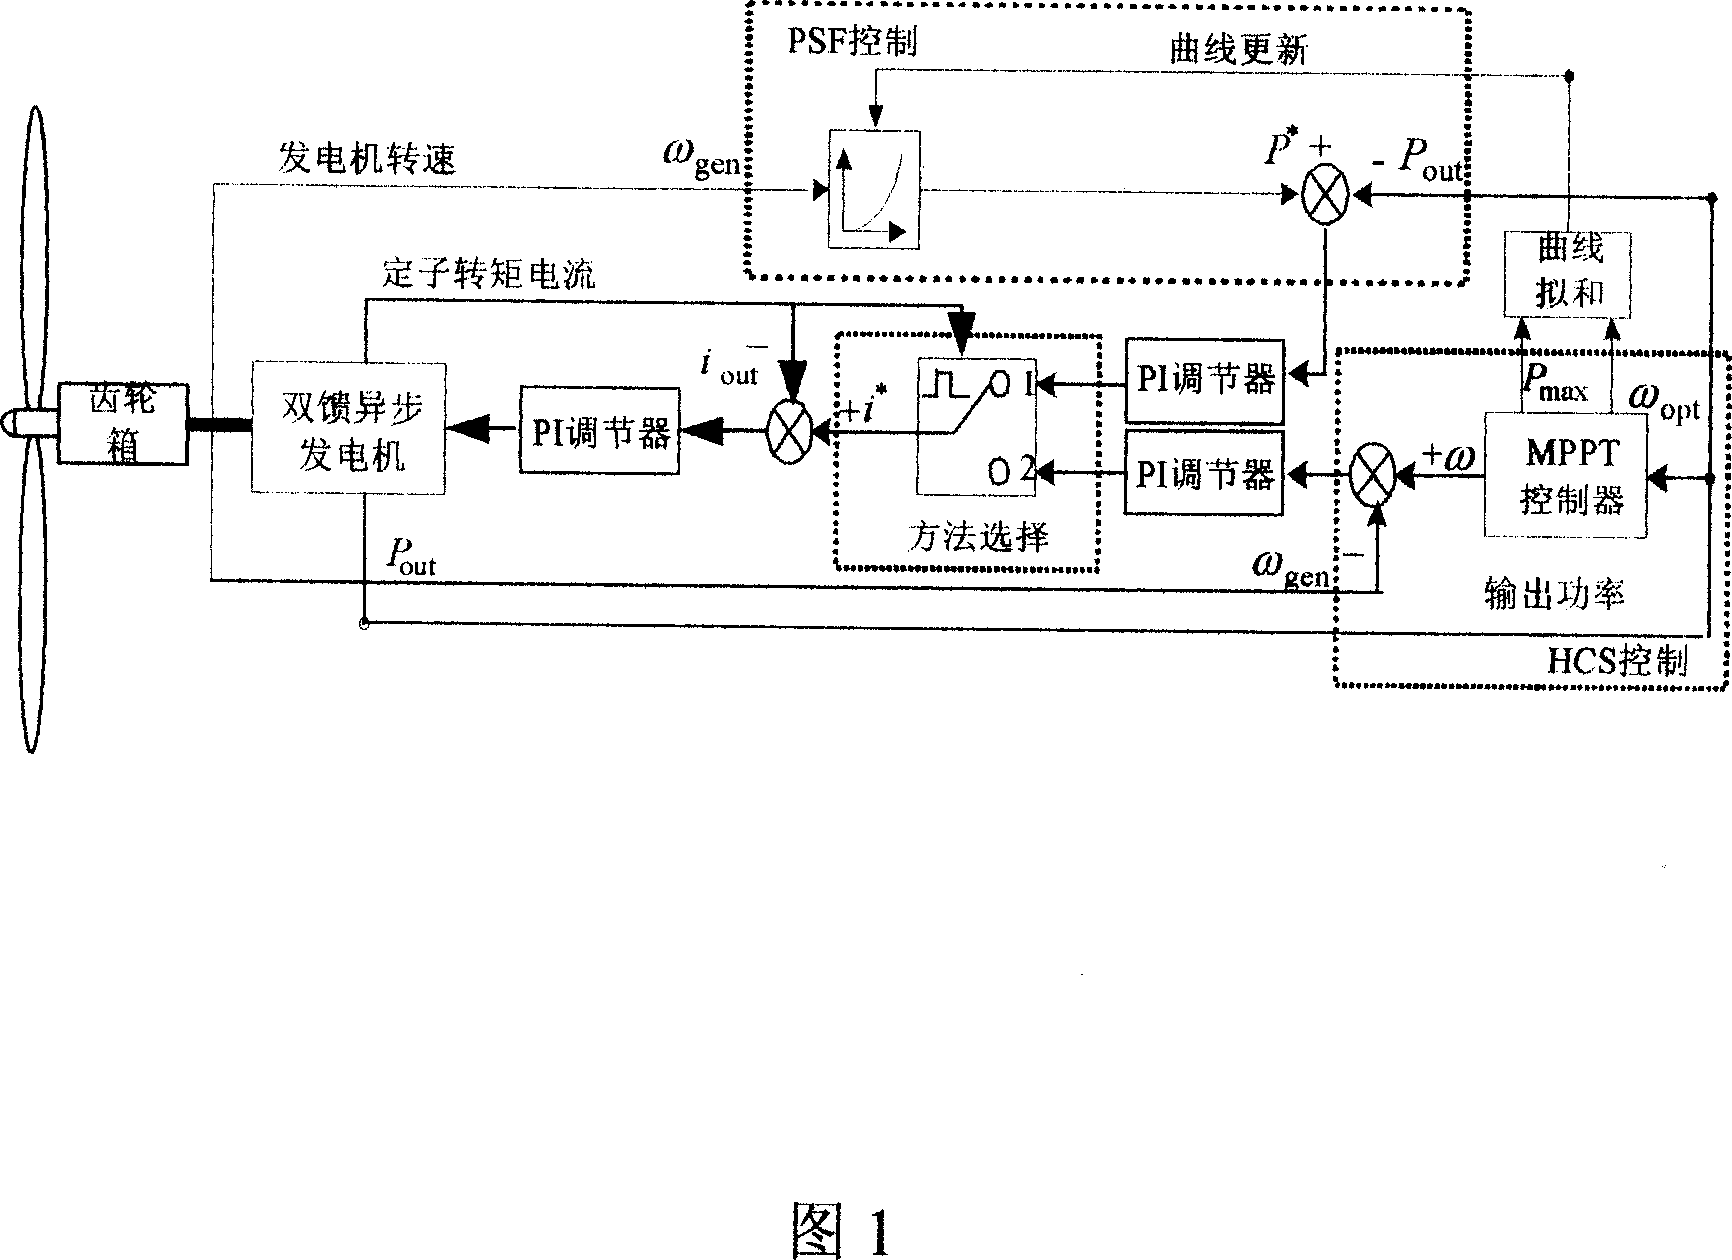 Control method for tracking maximum power point of wind electric power generation